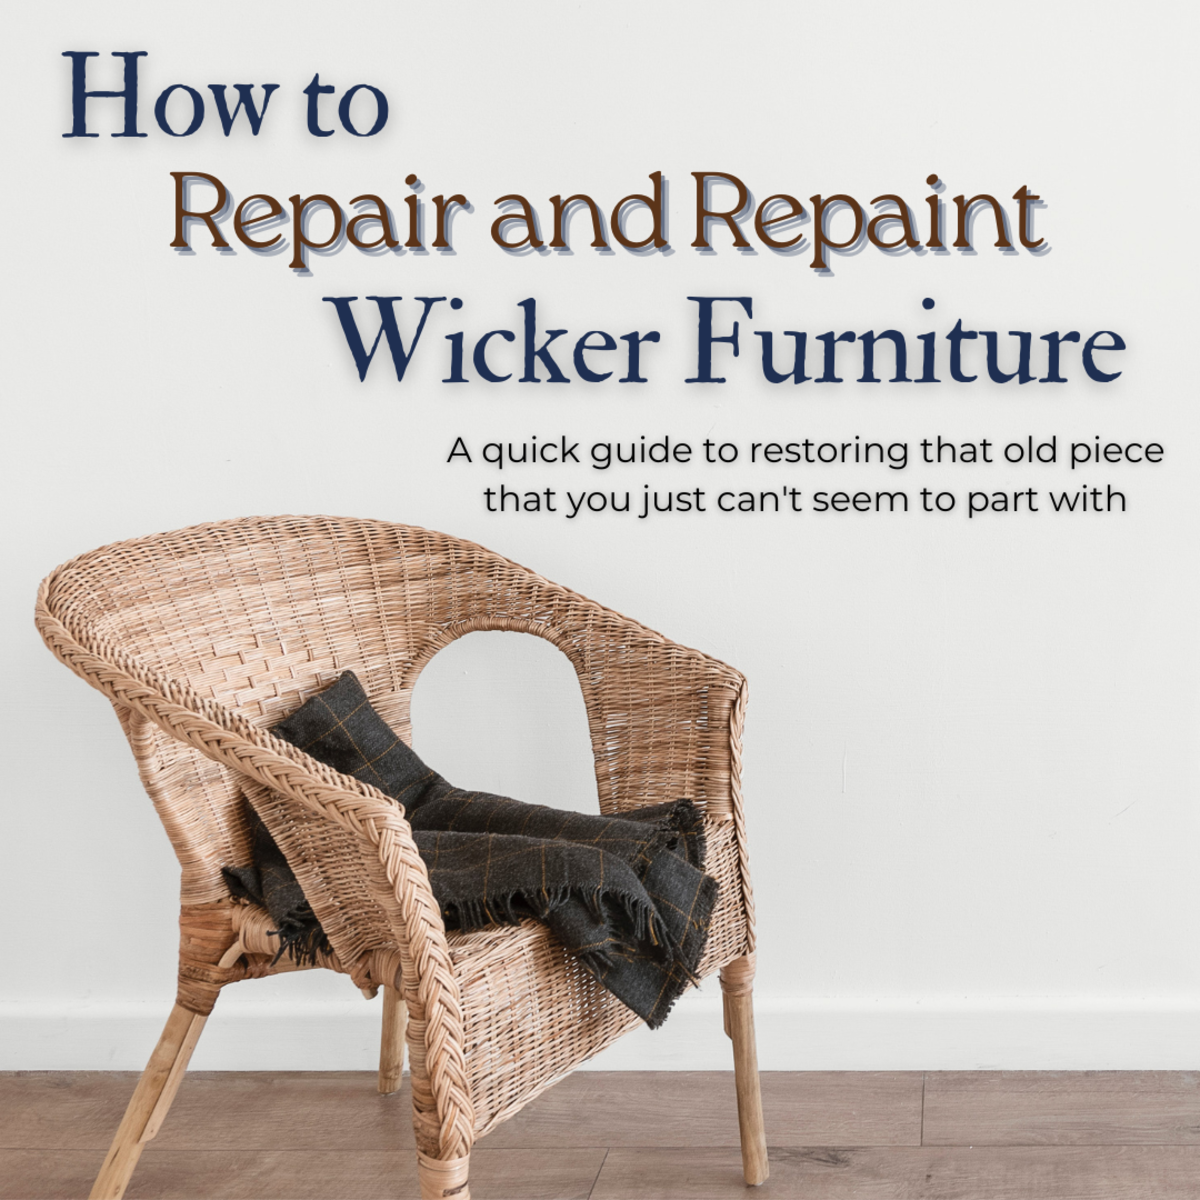 This guide will break down the process of repairing and repainting your old wicker furniture.